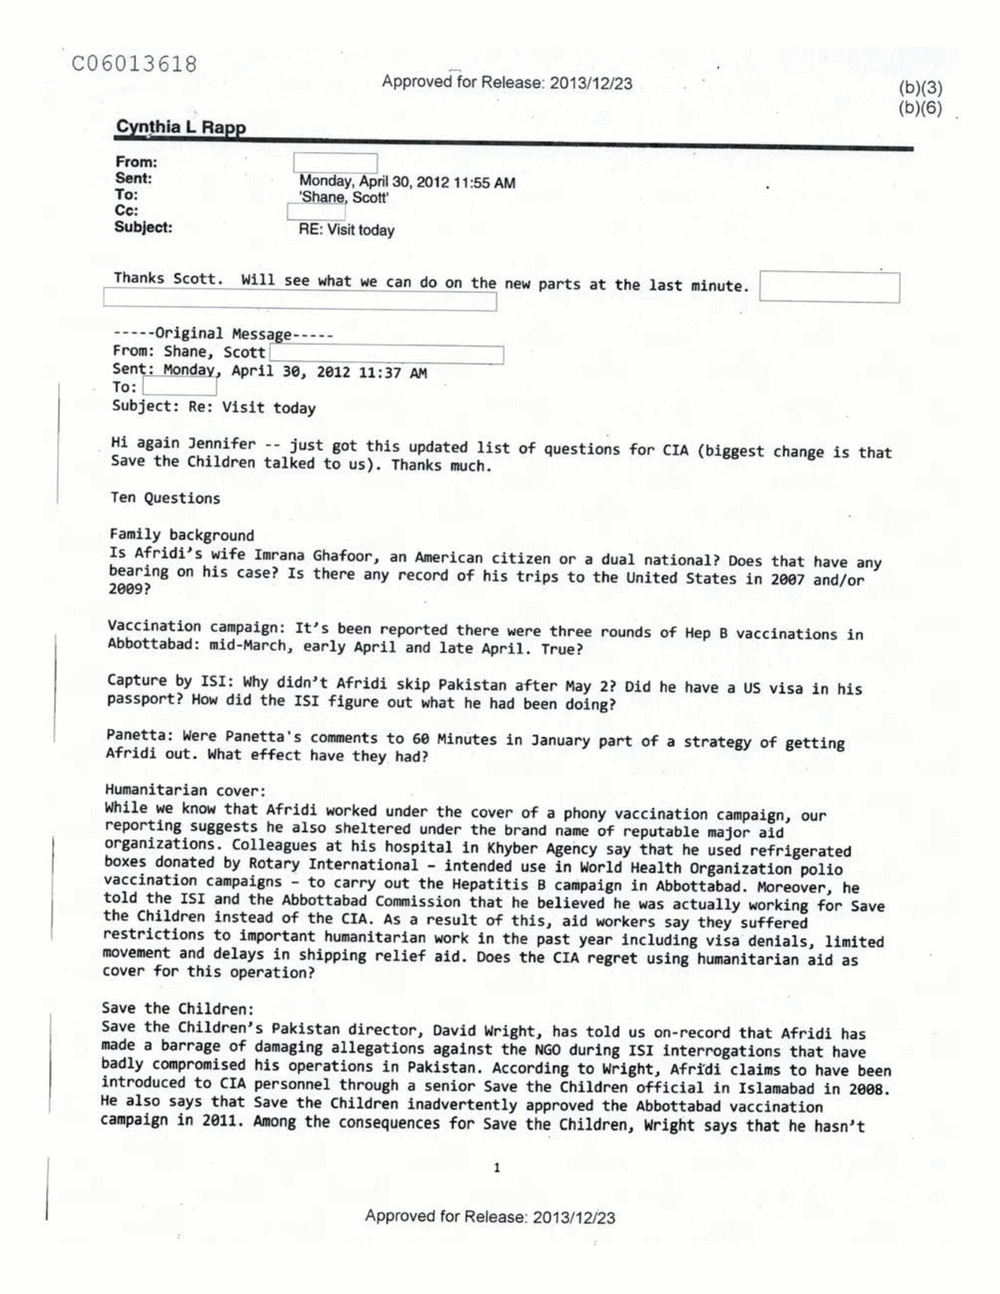 Page 448 from Email Correspondence Between Reporters and CIA Flacks